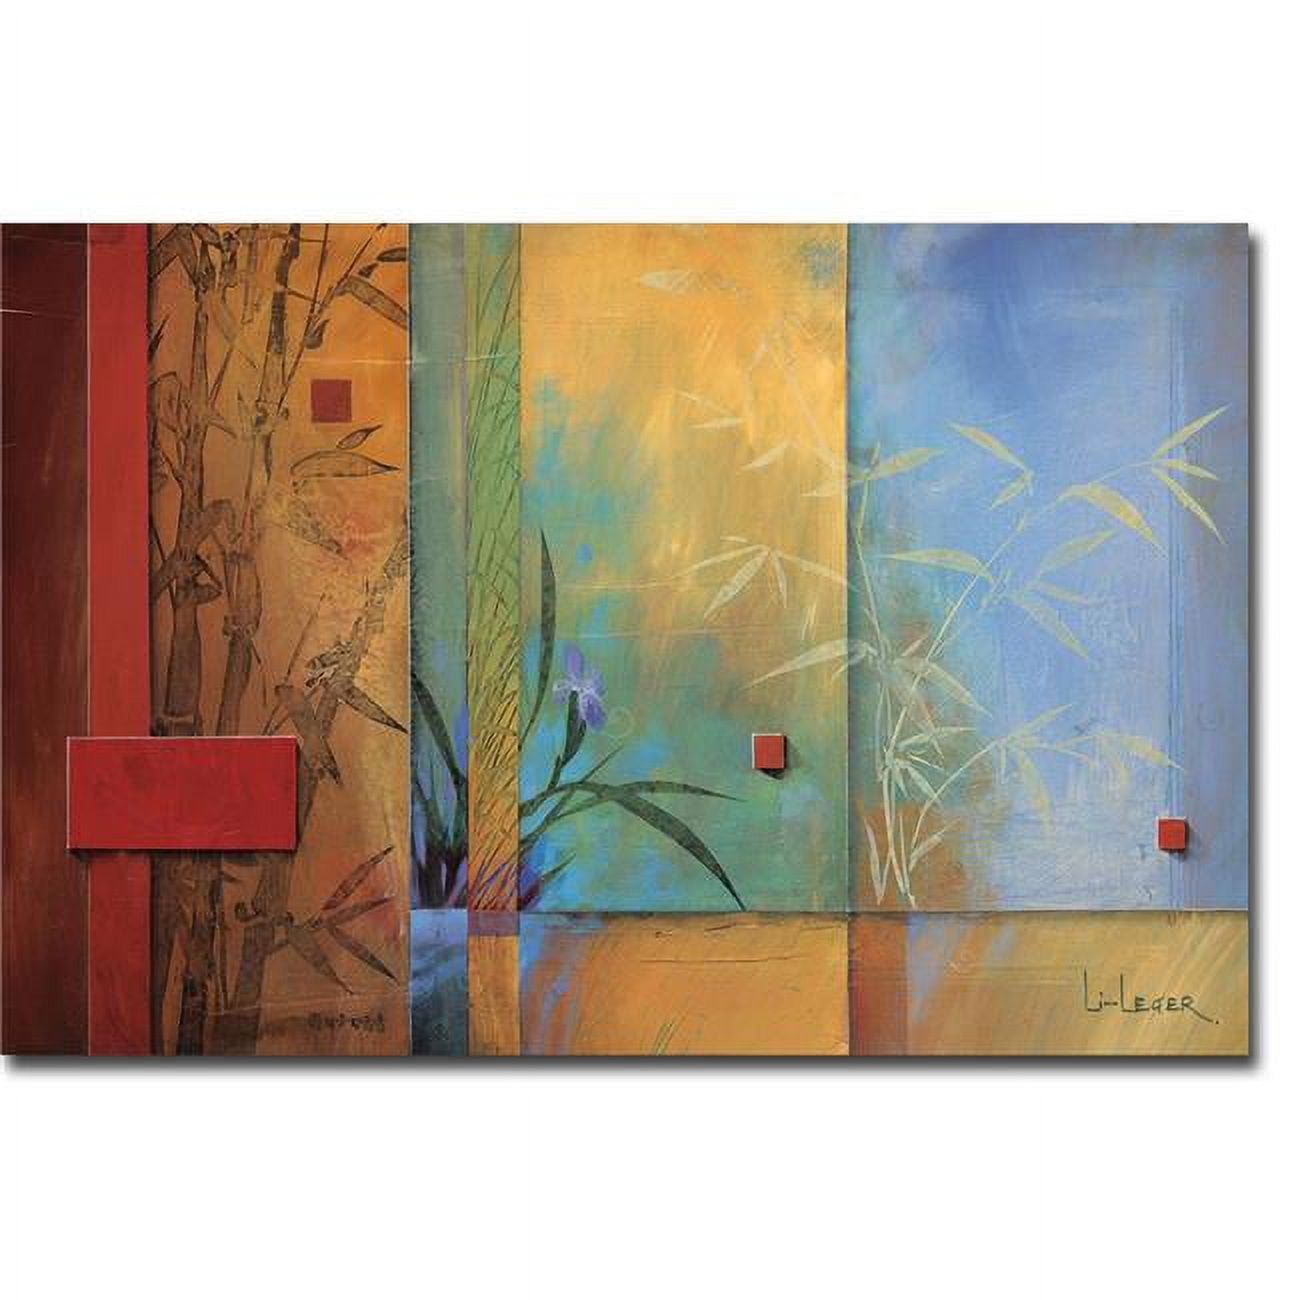 Spa Dreams By Don Li-leger Premium Gallery-wrapped Canvas Giclee Art - 16 X 24 X 1.5 In.